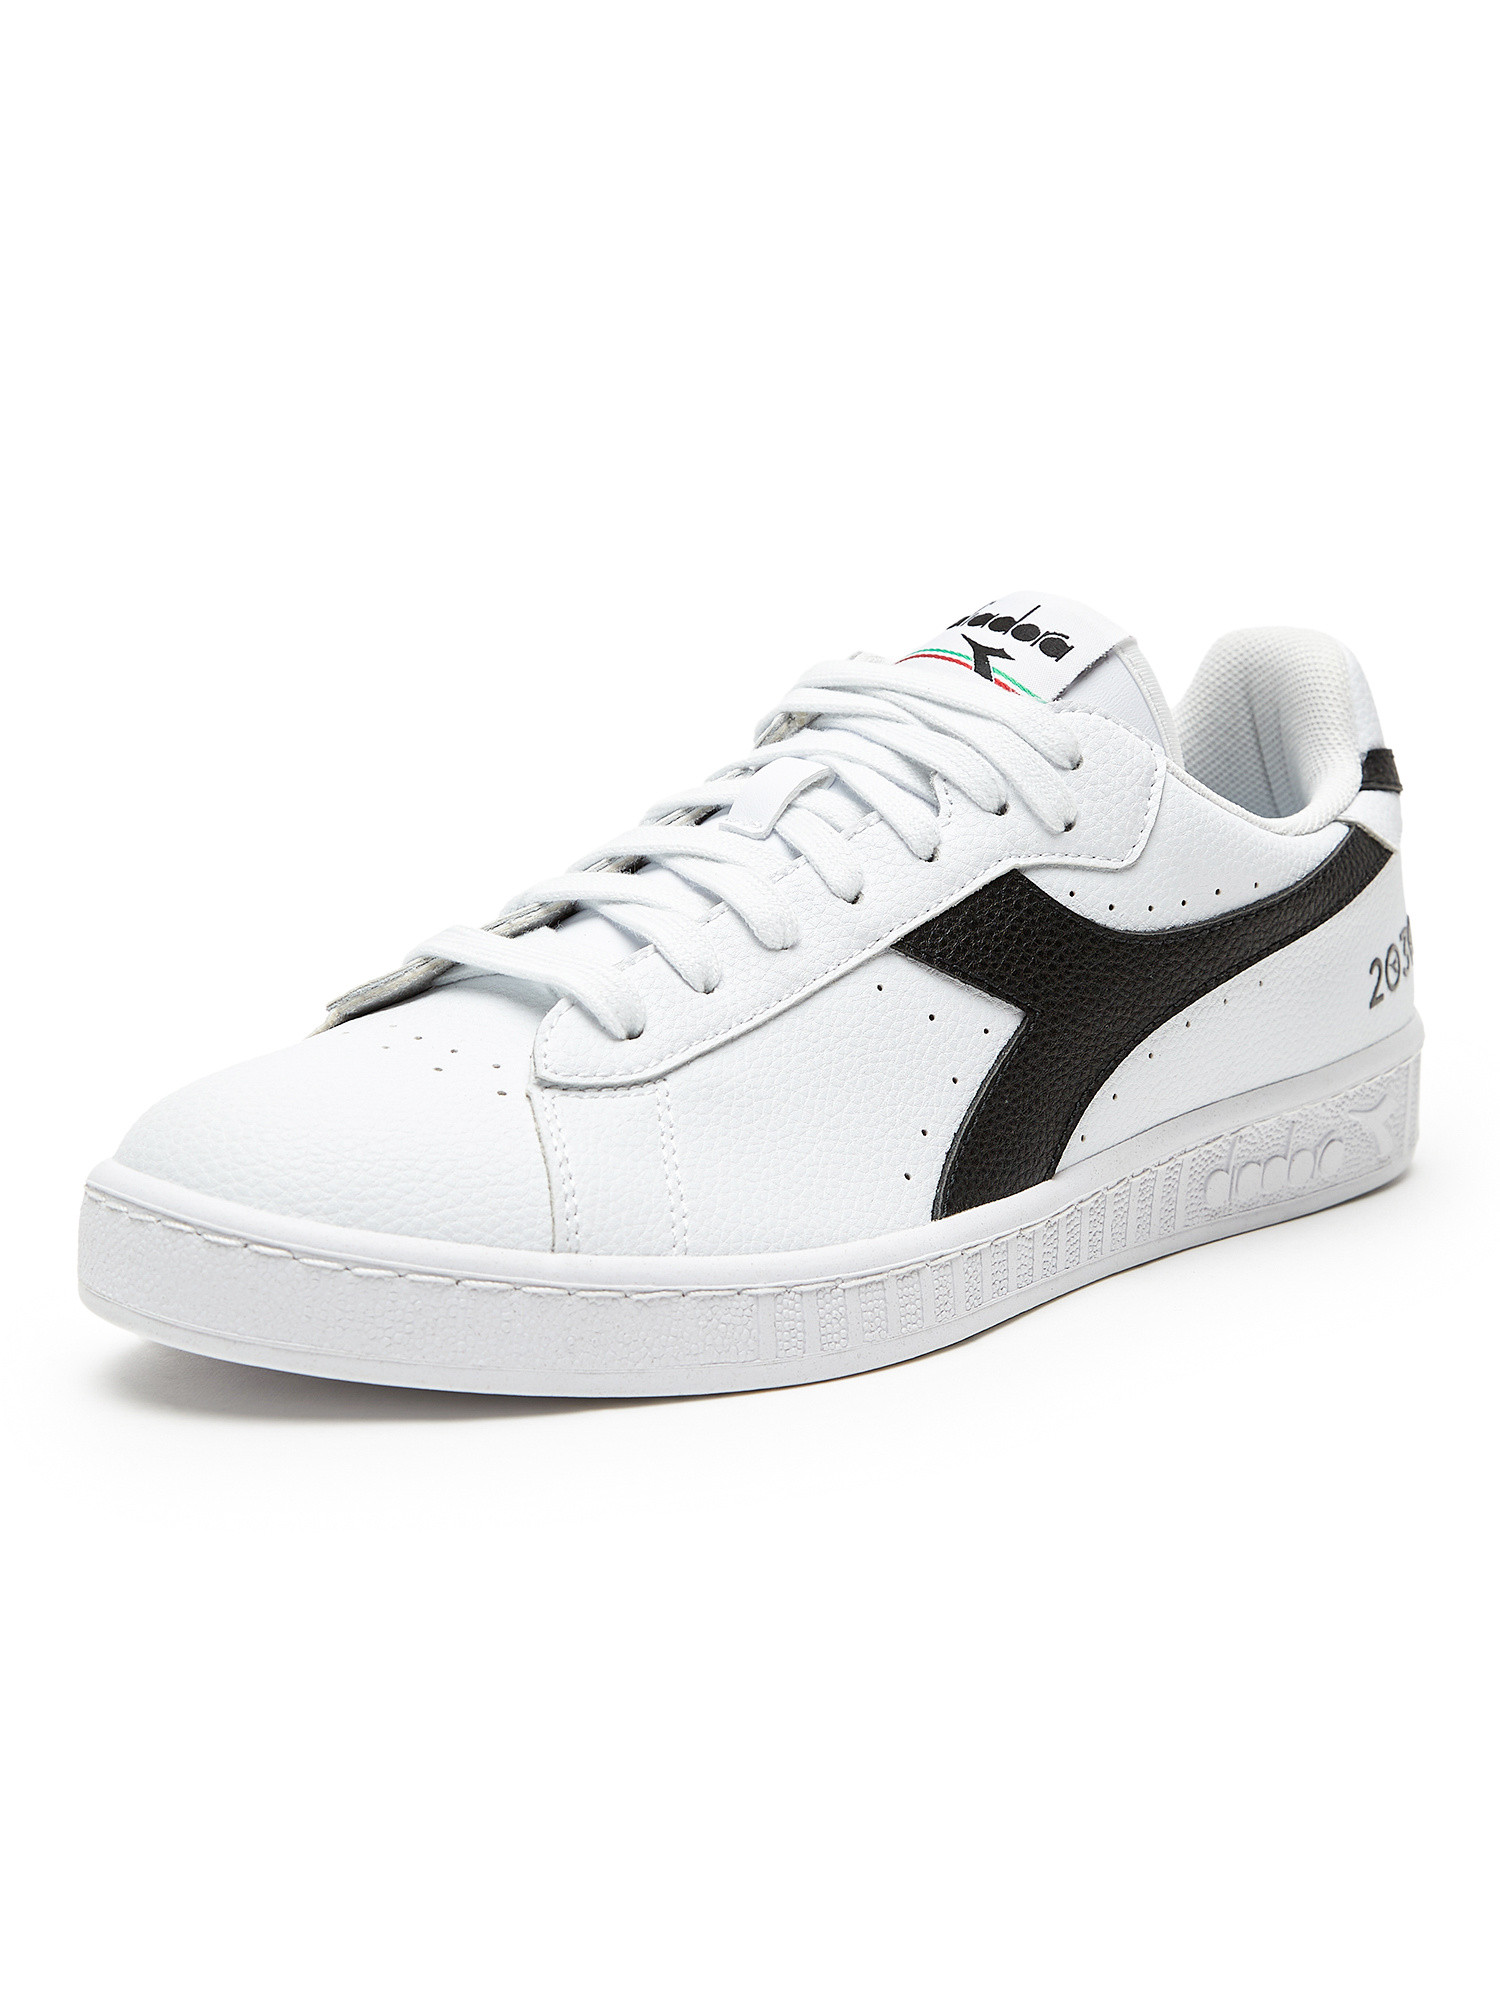 Diadora - Game L Low 2030 Shoes, White, large image number 1